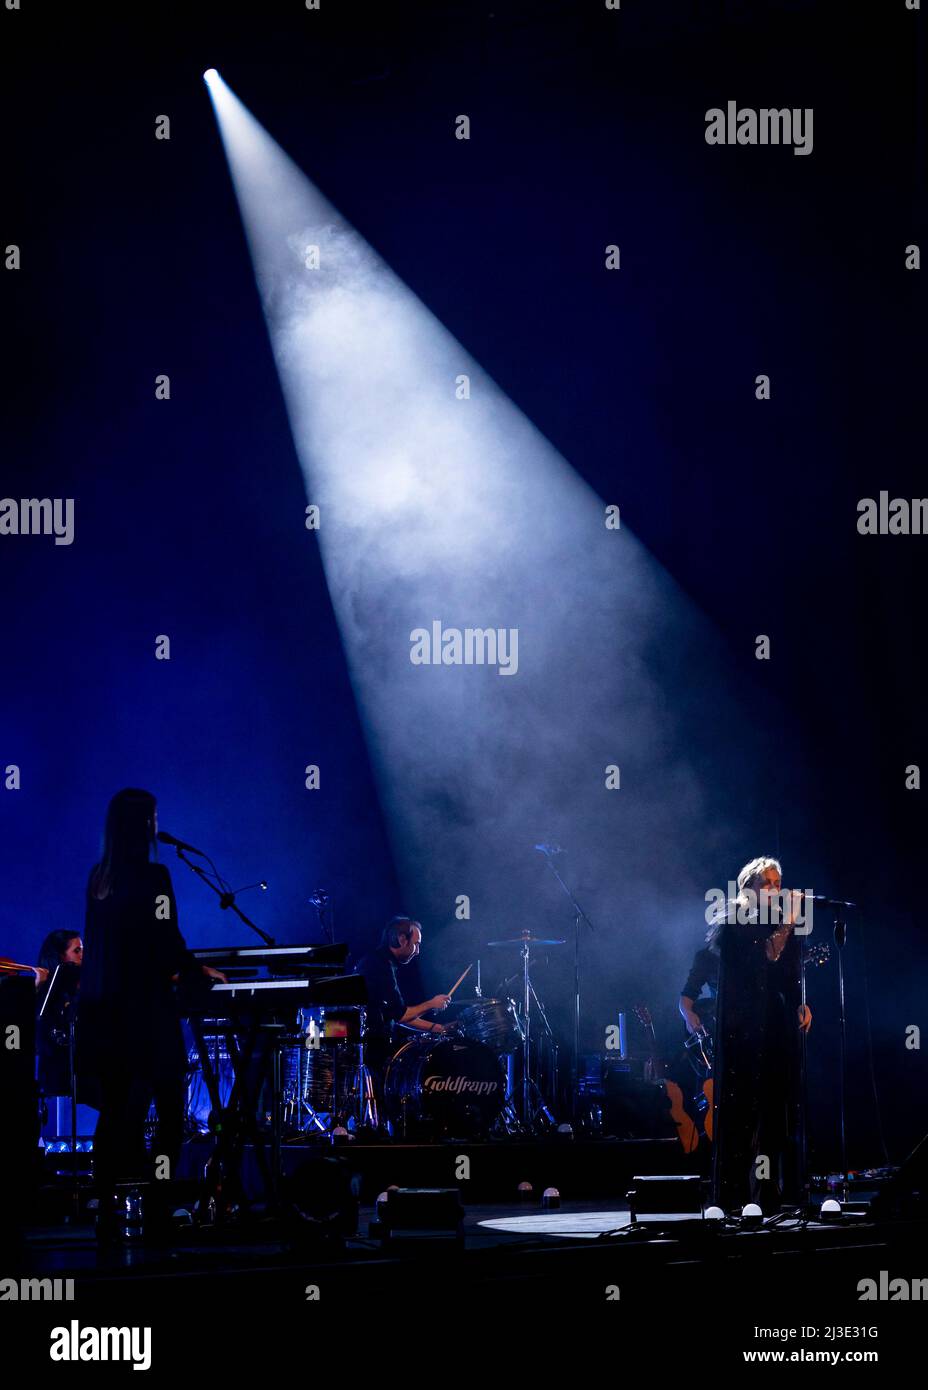 Edinburgh, UK. 07th Apr, 2022. Goldfrapp perform Live at the Edinburgh Usher Hall on Thursday 7th April to celebrate the 20th anniversary of 'Felt Mountain' The duo consists of Alison Goldfrapp (vocals, synthesiser) and Will Gregory (synthesiser). Credit: Alan Rennie/Alamy Live News Stock Photo